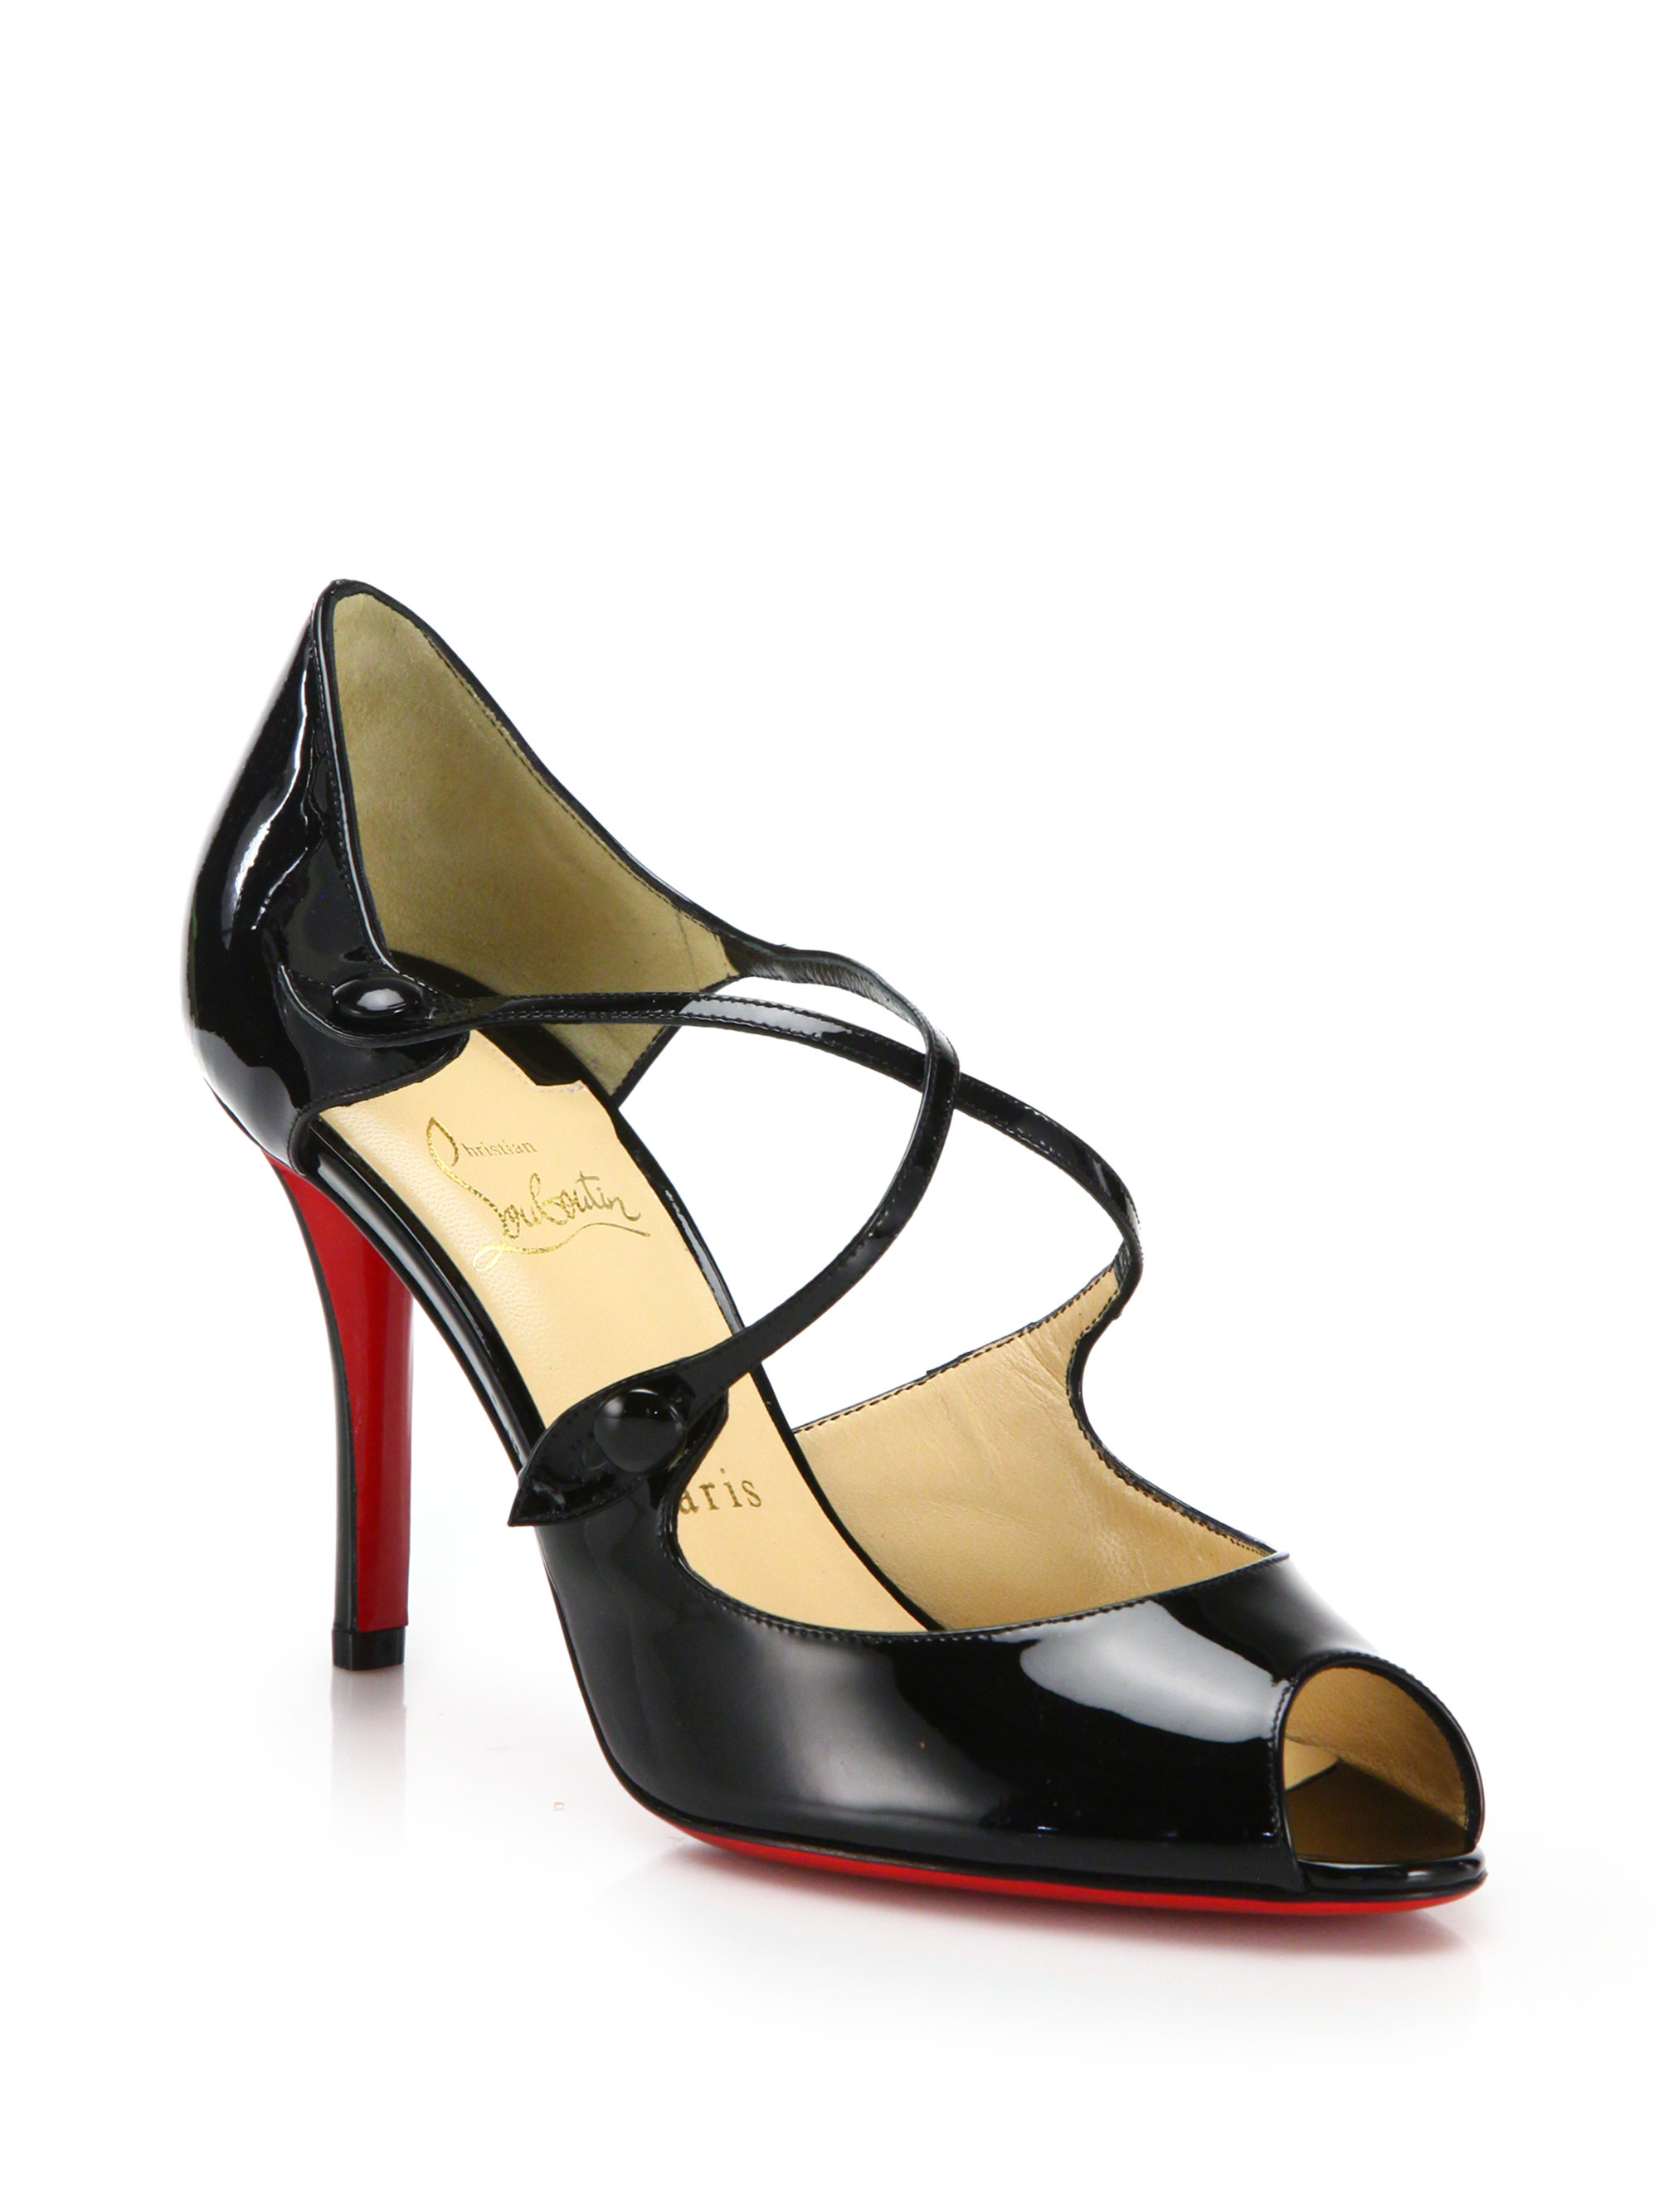 Christian louboutin Debriditoe Patent Leather Sandals in Black | Lyst